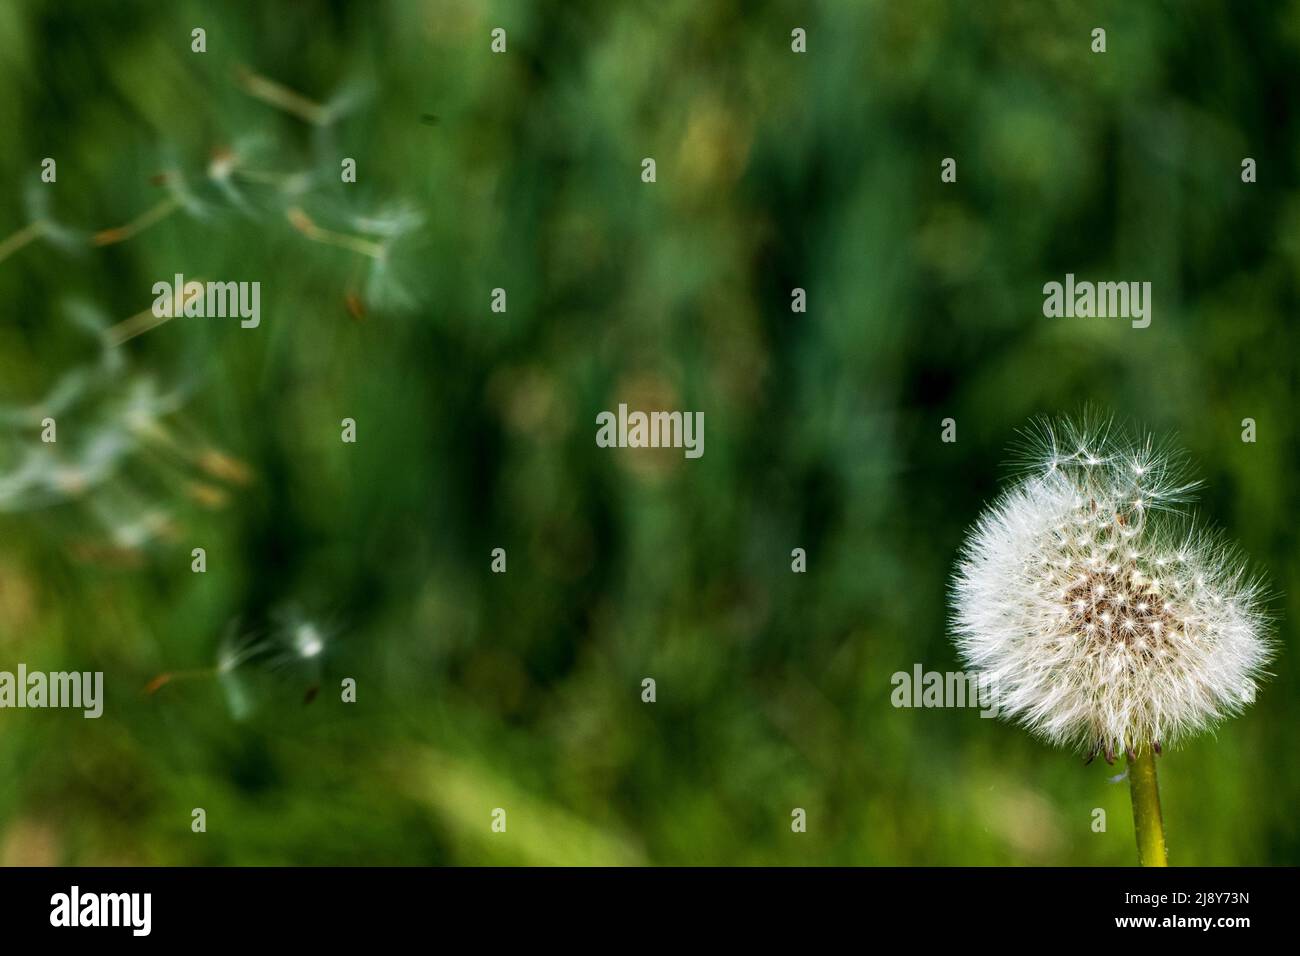 Dandelion against a blurred, green background with several flying parachutes Stock Photo